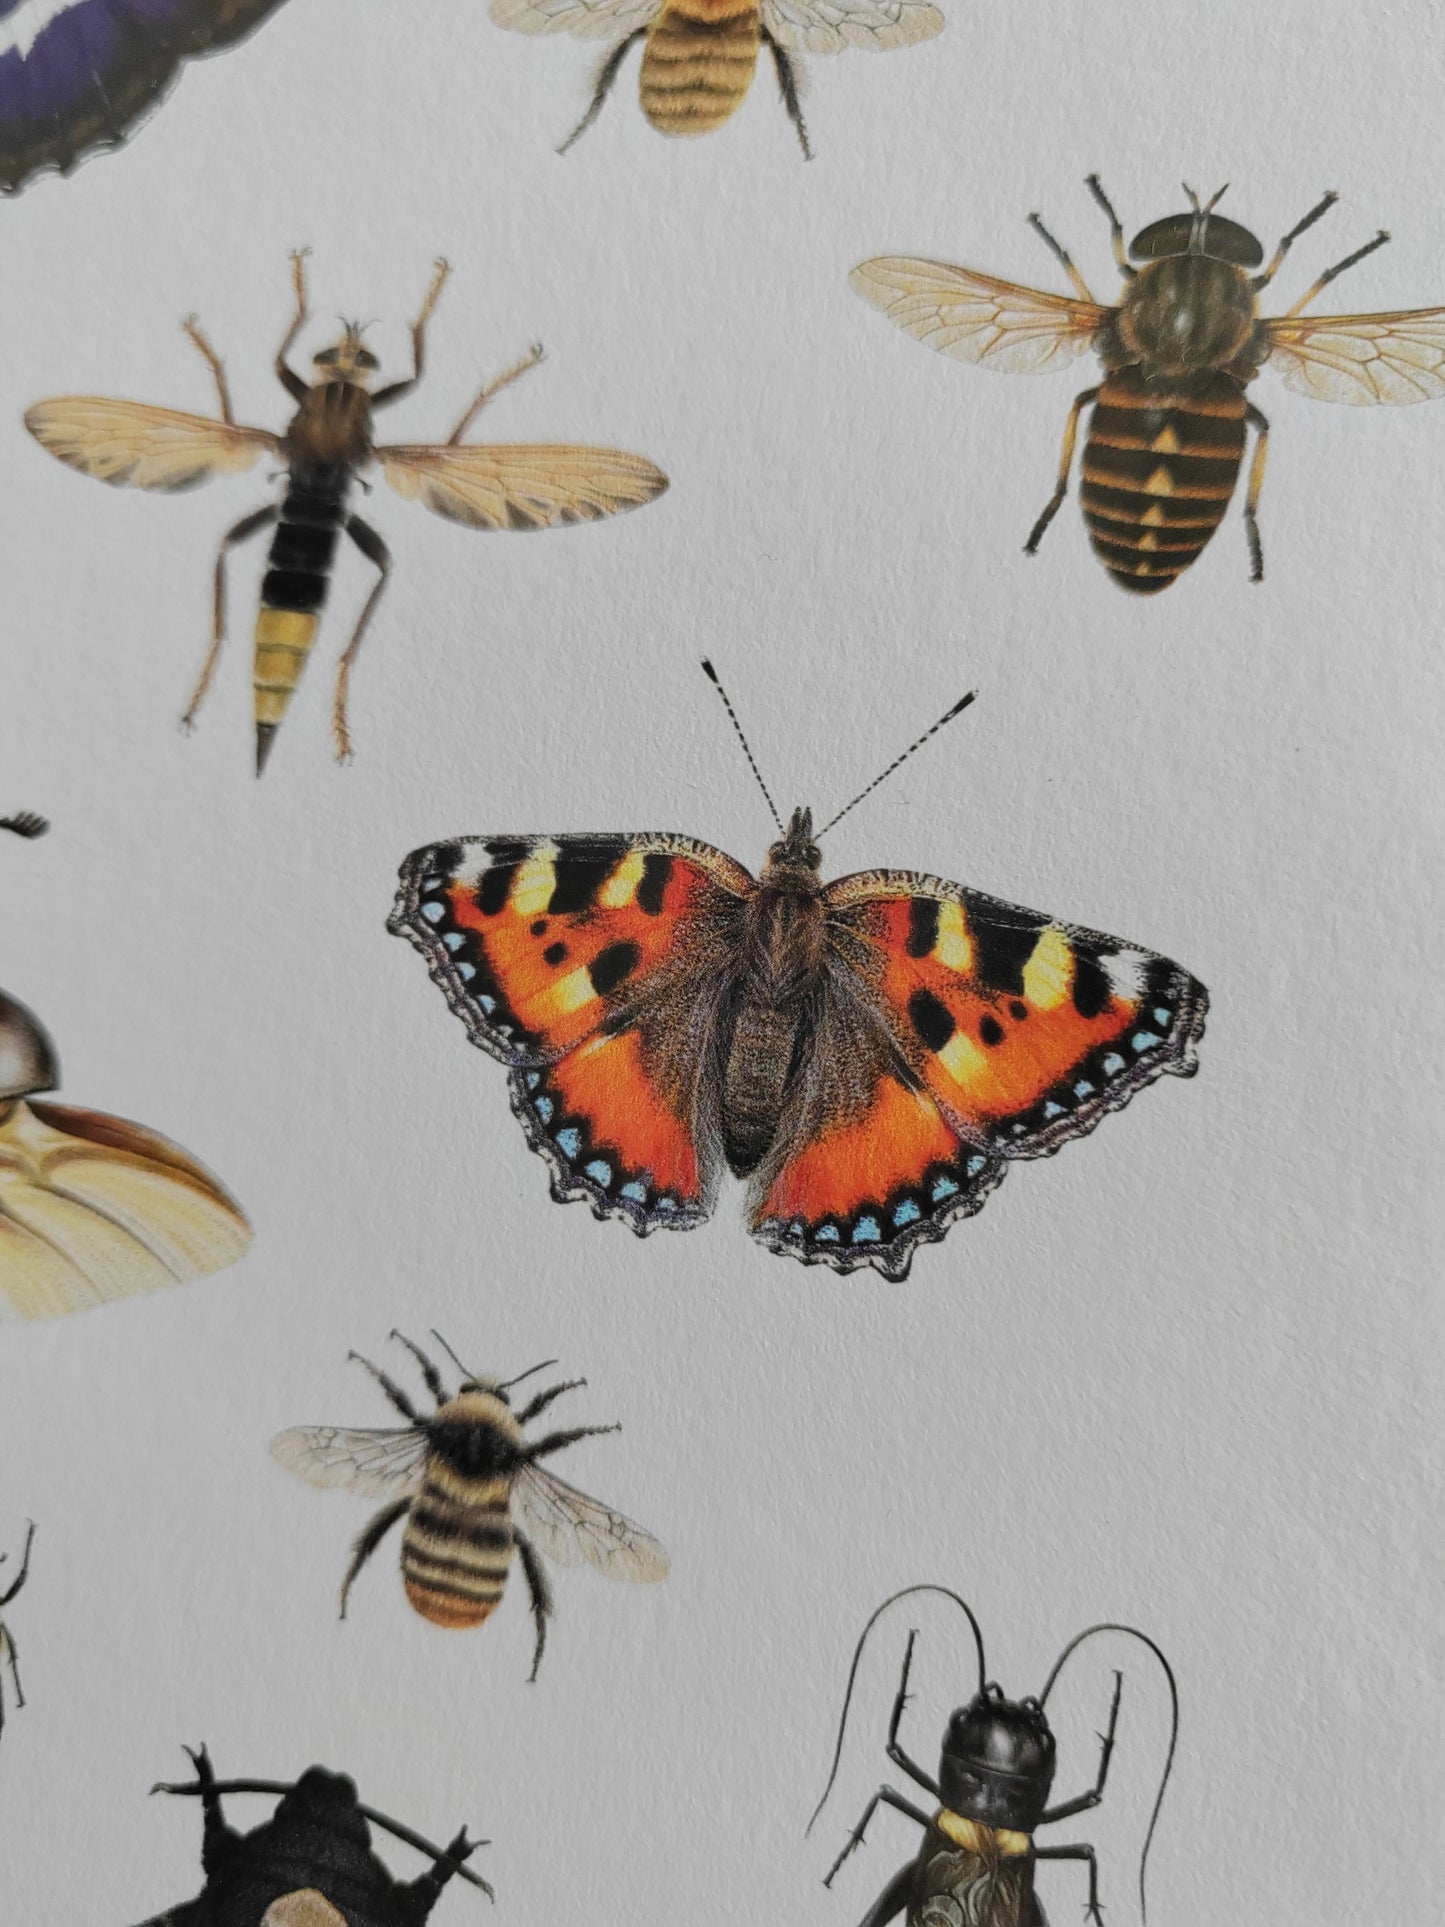 British Insects Lifesize compilation 1 (limited edition art print)